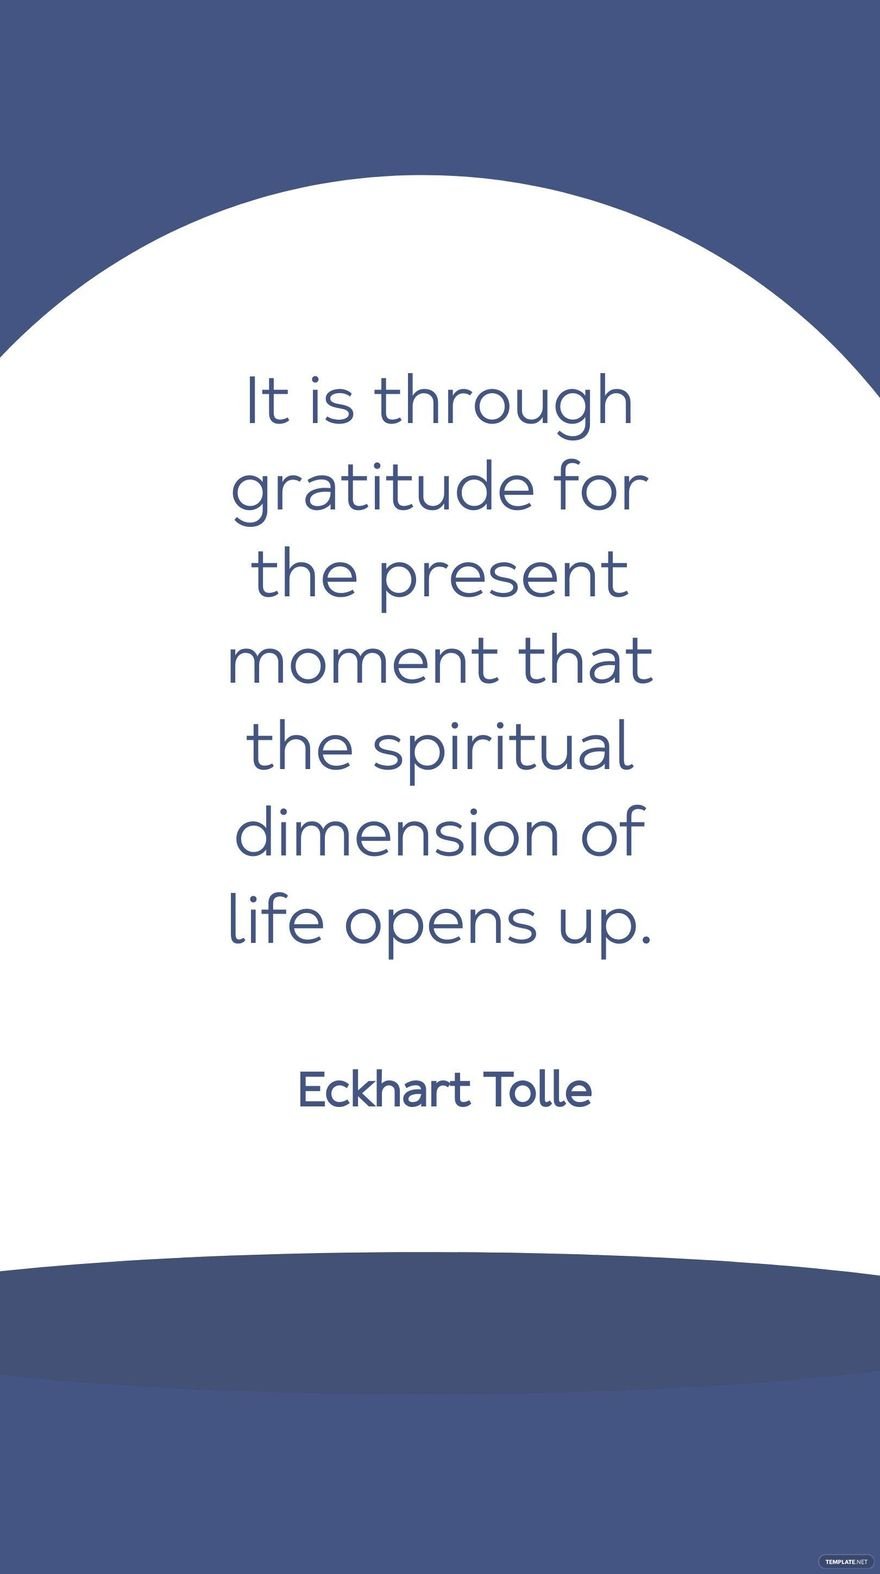 Eckhart Tolle -It is through gratitude for the present moment that the spiritual dimension of life opens up.